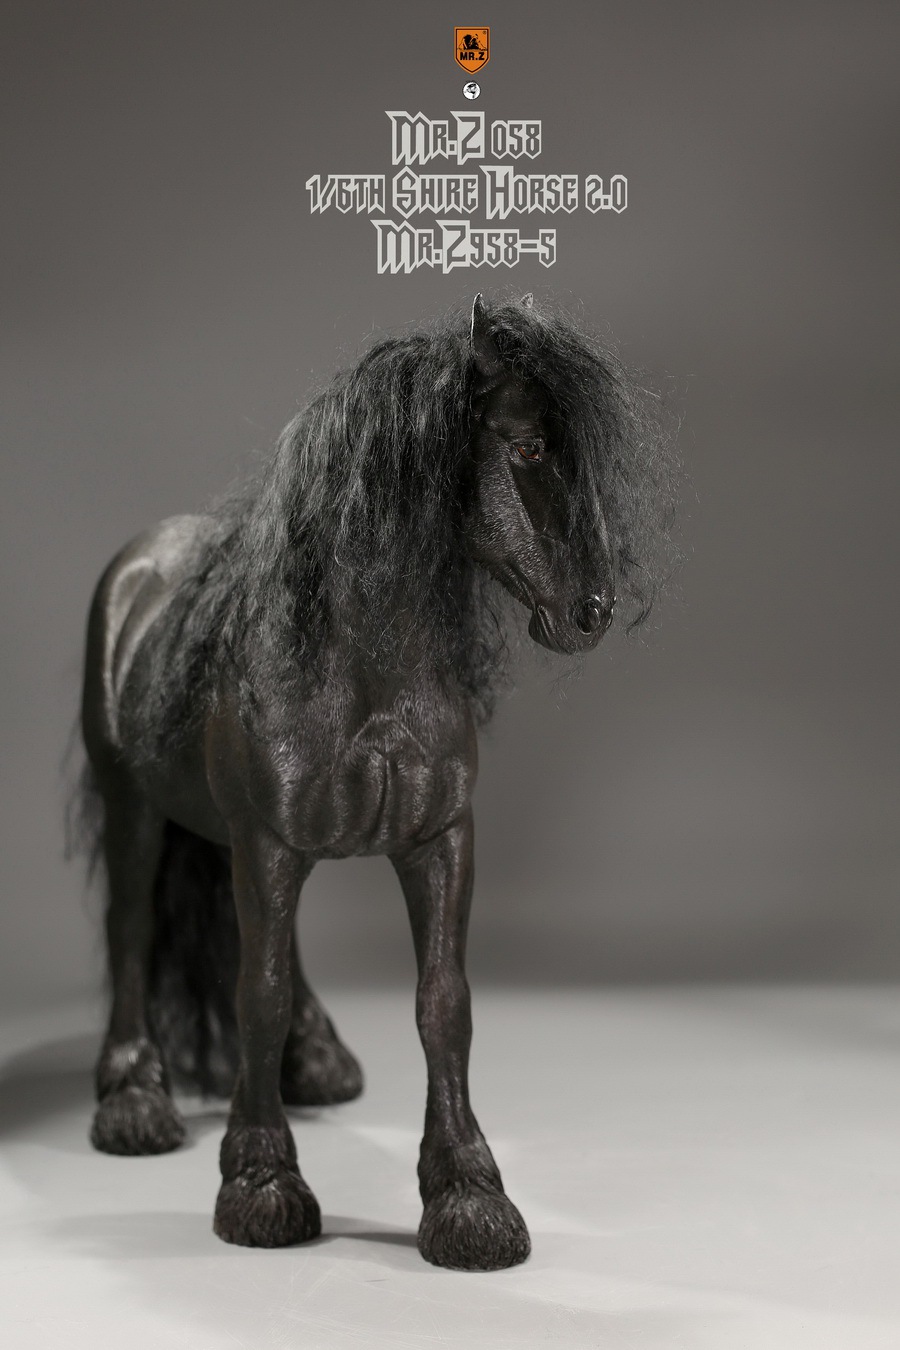 NEW PRODUCT: MR. Z: 58th round-Shire Horse 2.0 version full set of 5 colors  08575812